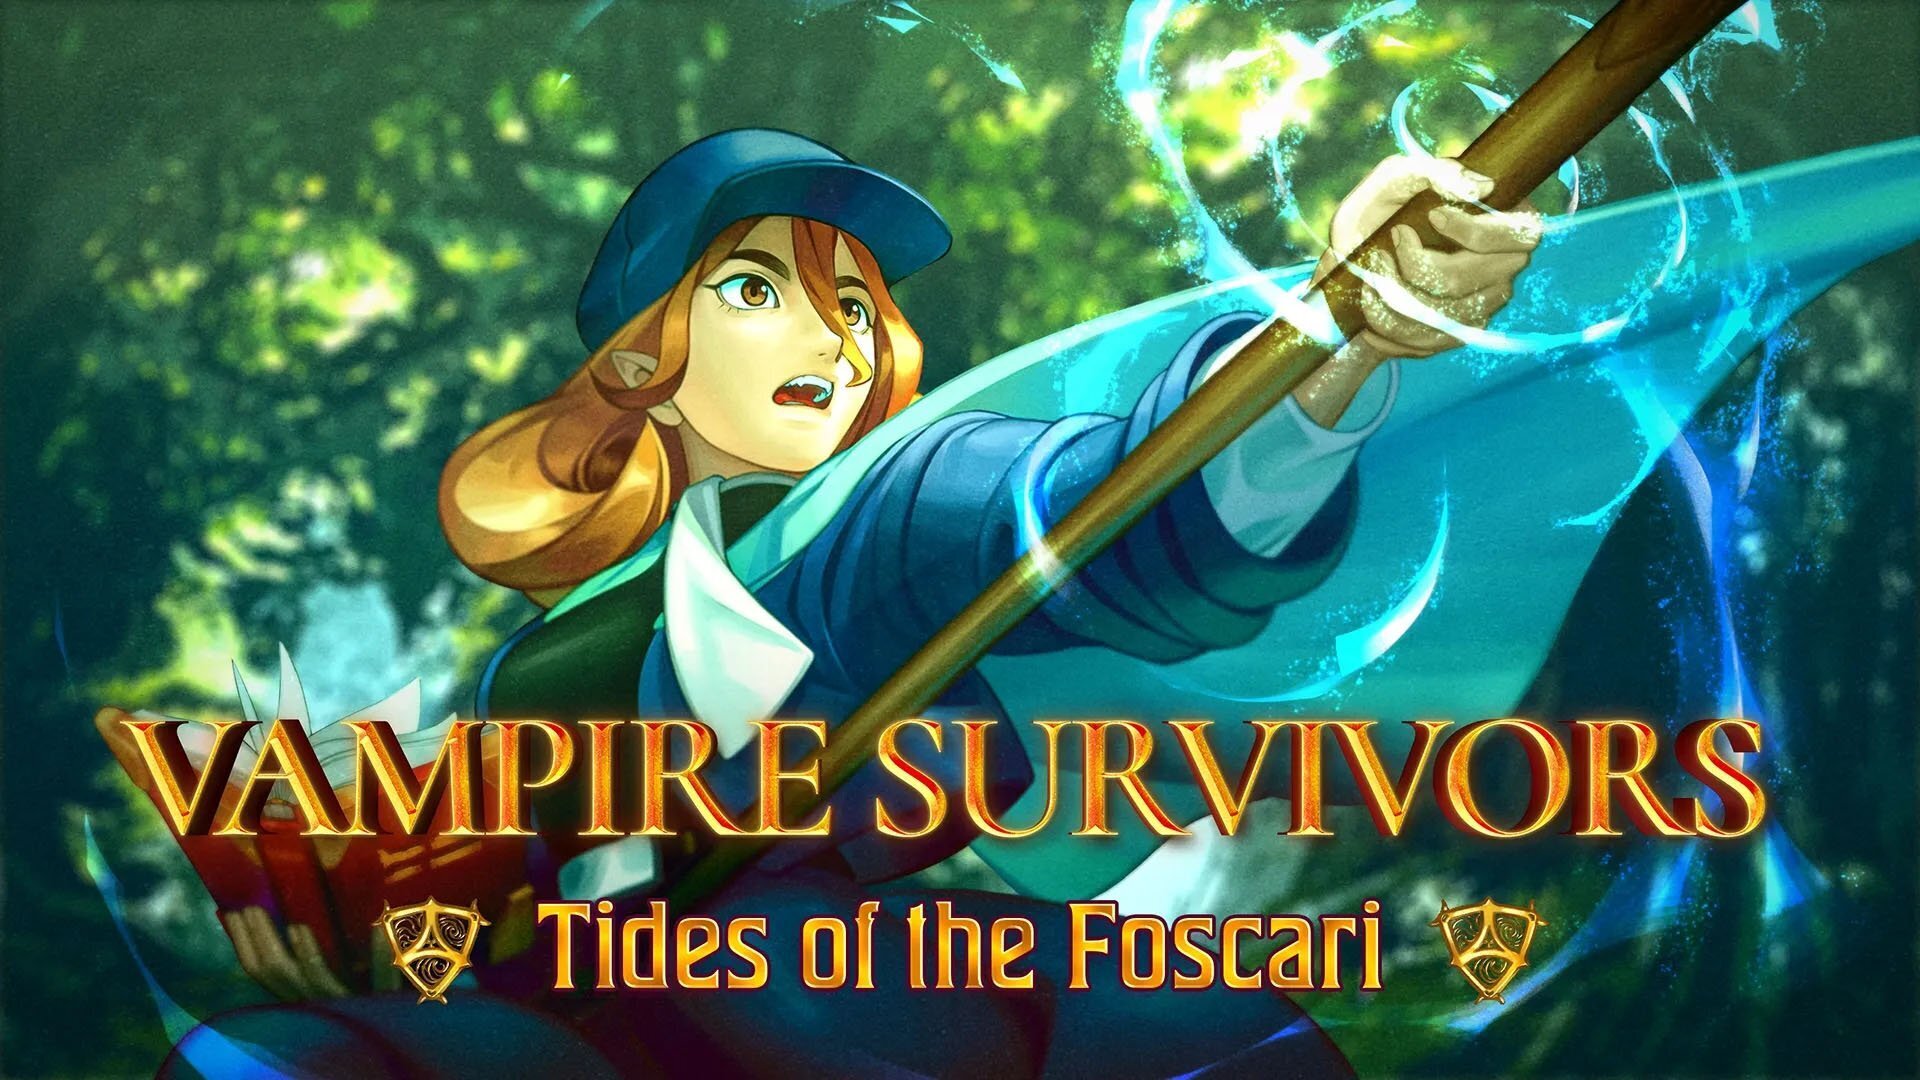 Vampire Survivors' Tides of the Foscari DLC available right now